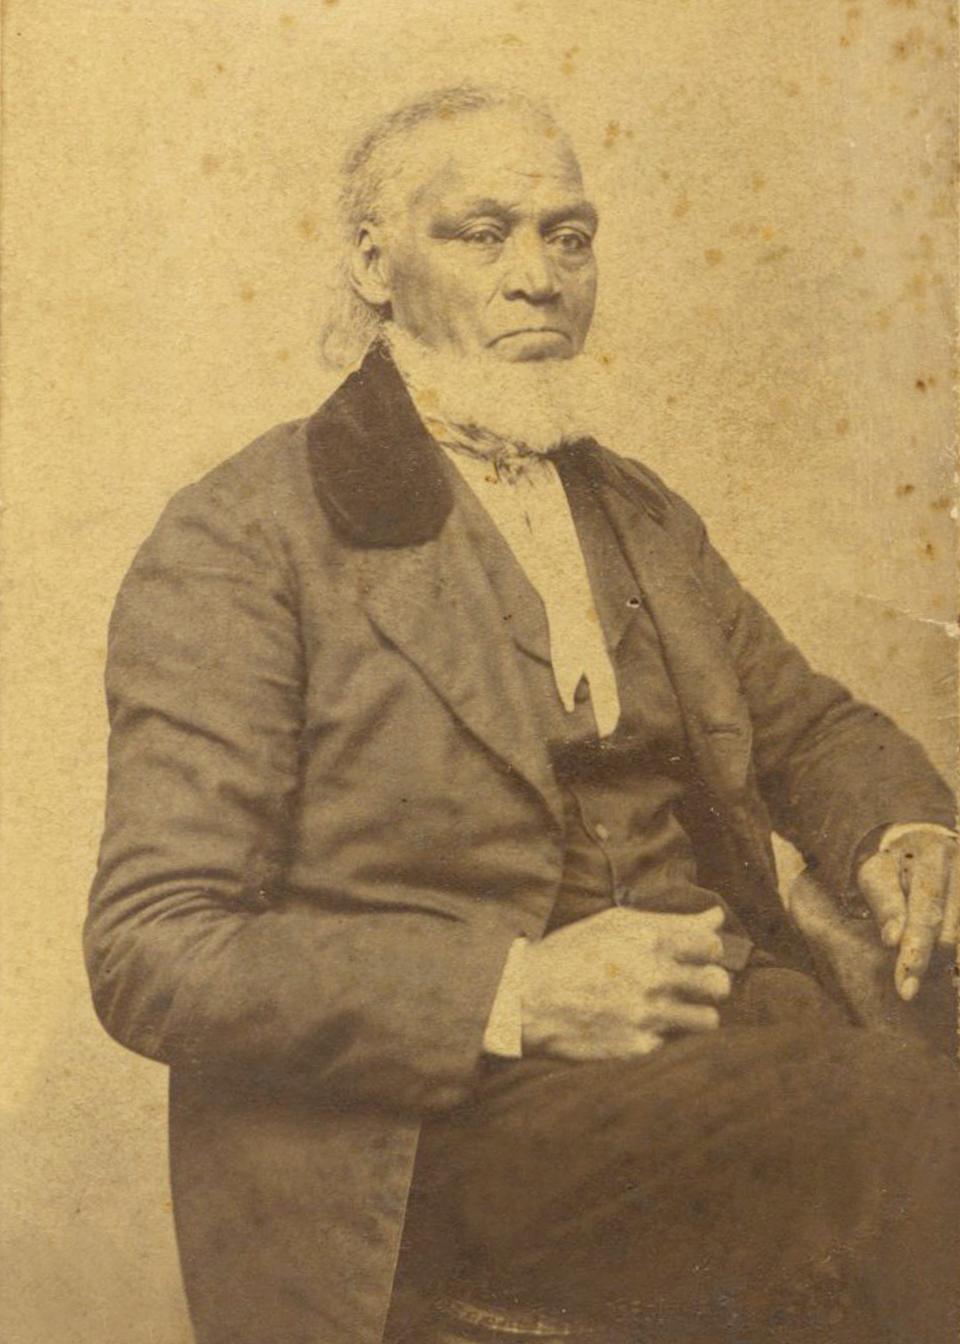 William Piper (1786-1870) an abolitionist and enslaved person who escaped by boat with his wife, Amelia, to New Bedford